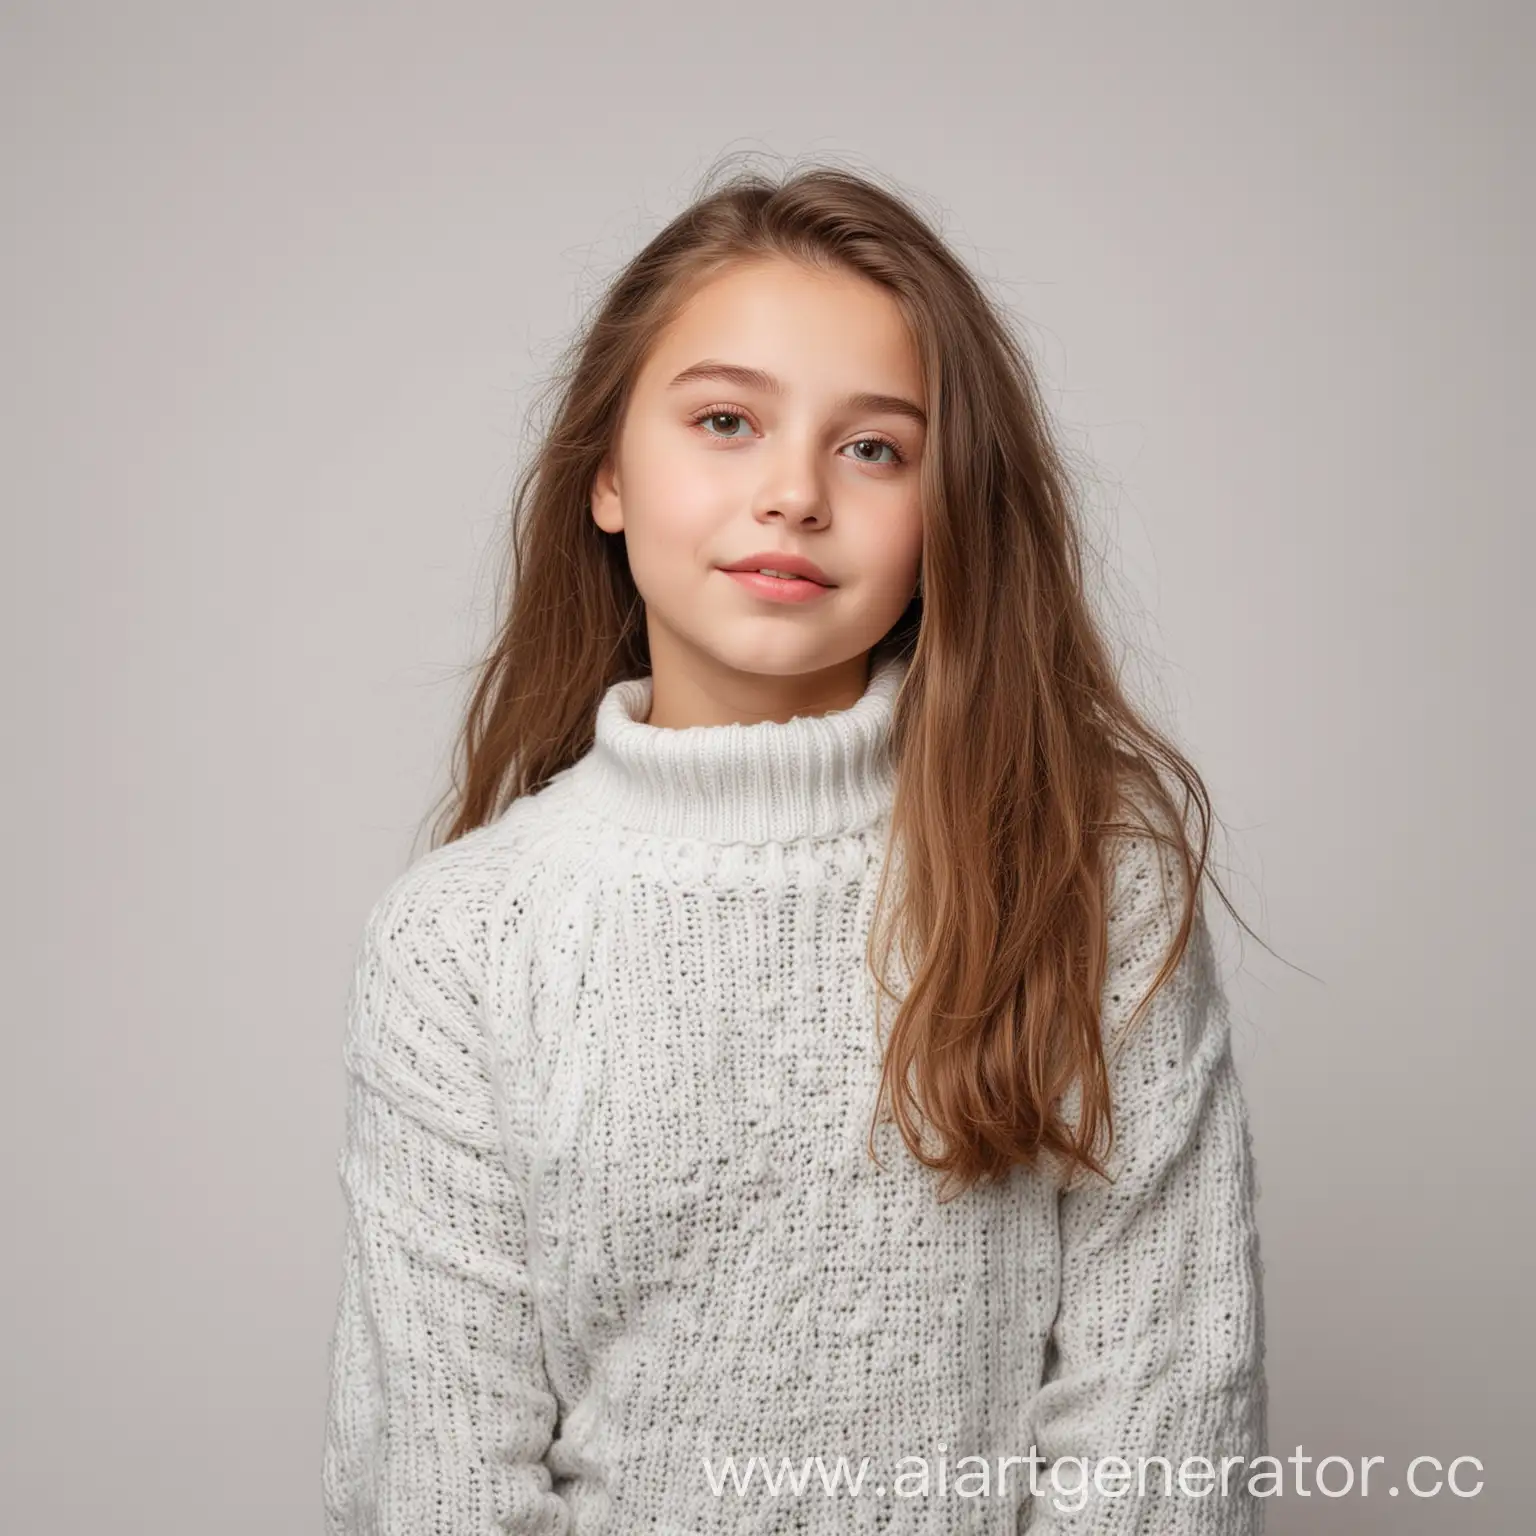 Adolescent-Girl-in-Sweater-on-Clean-White-Background